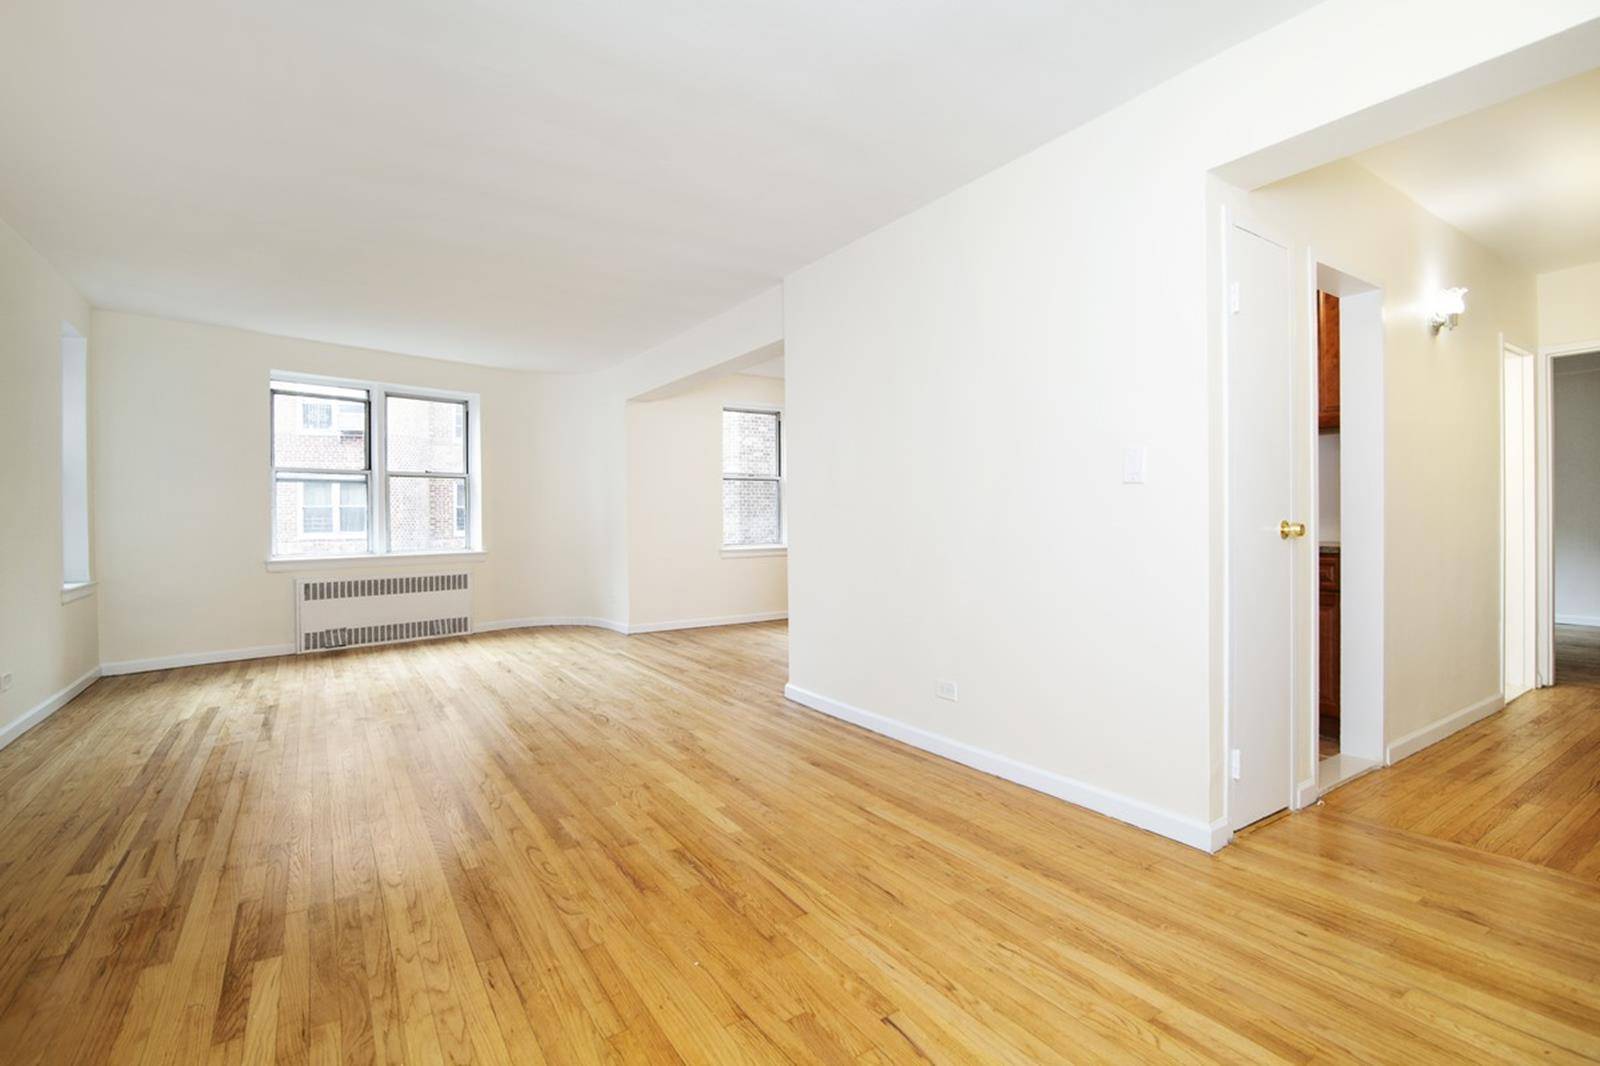 Welcome home to the perfect one bedroom apartment in the heart of the Grand Concourse Historic District.